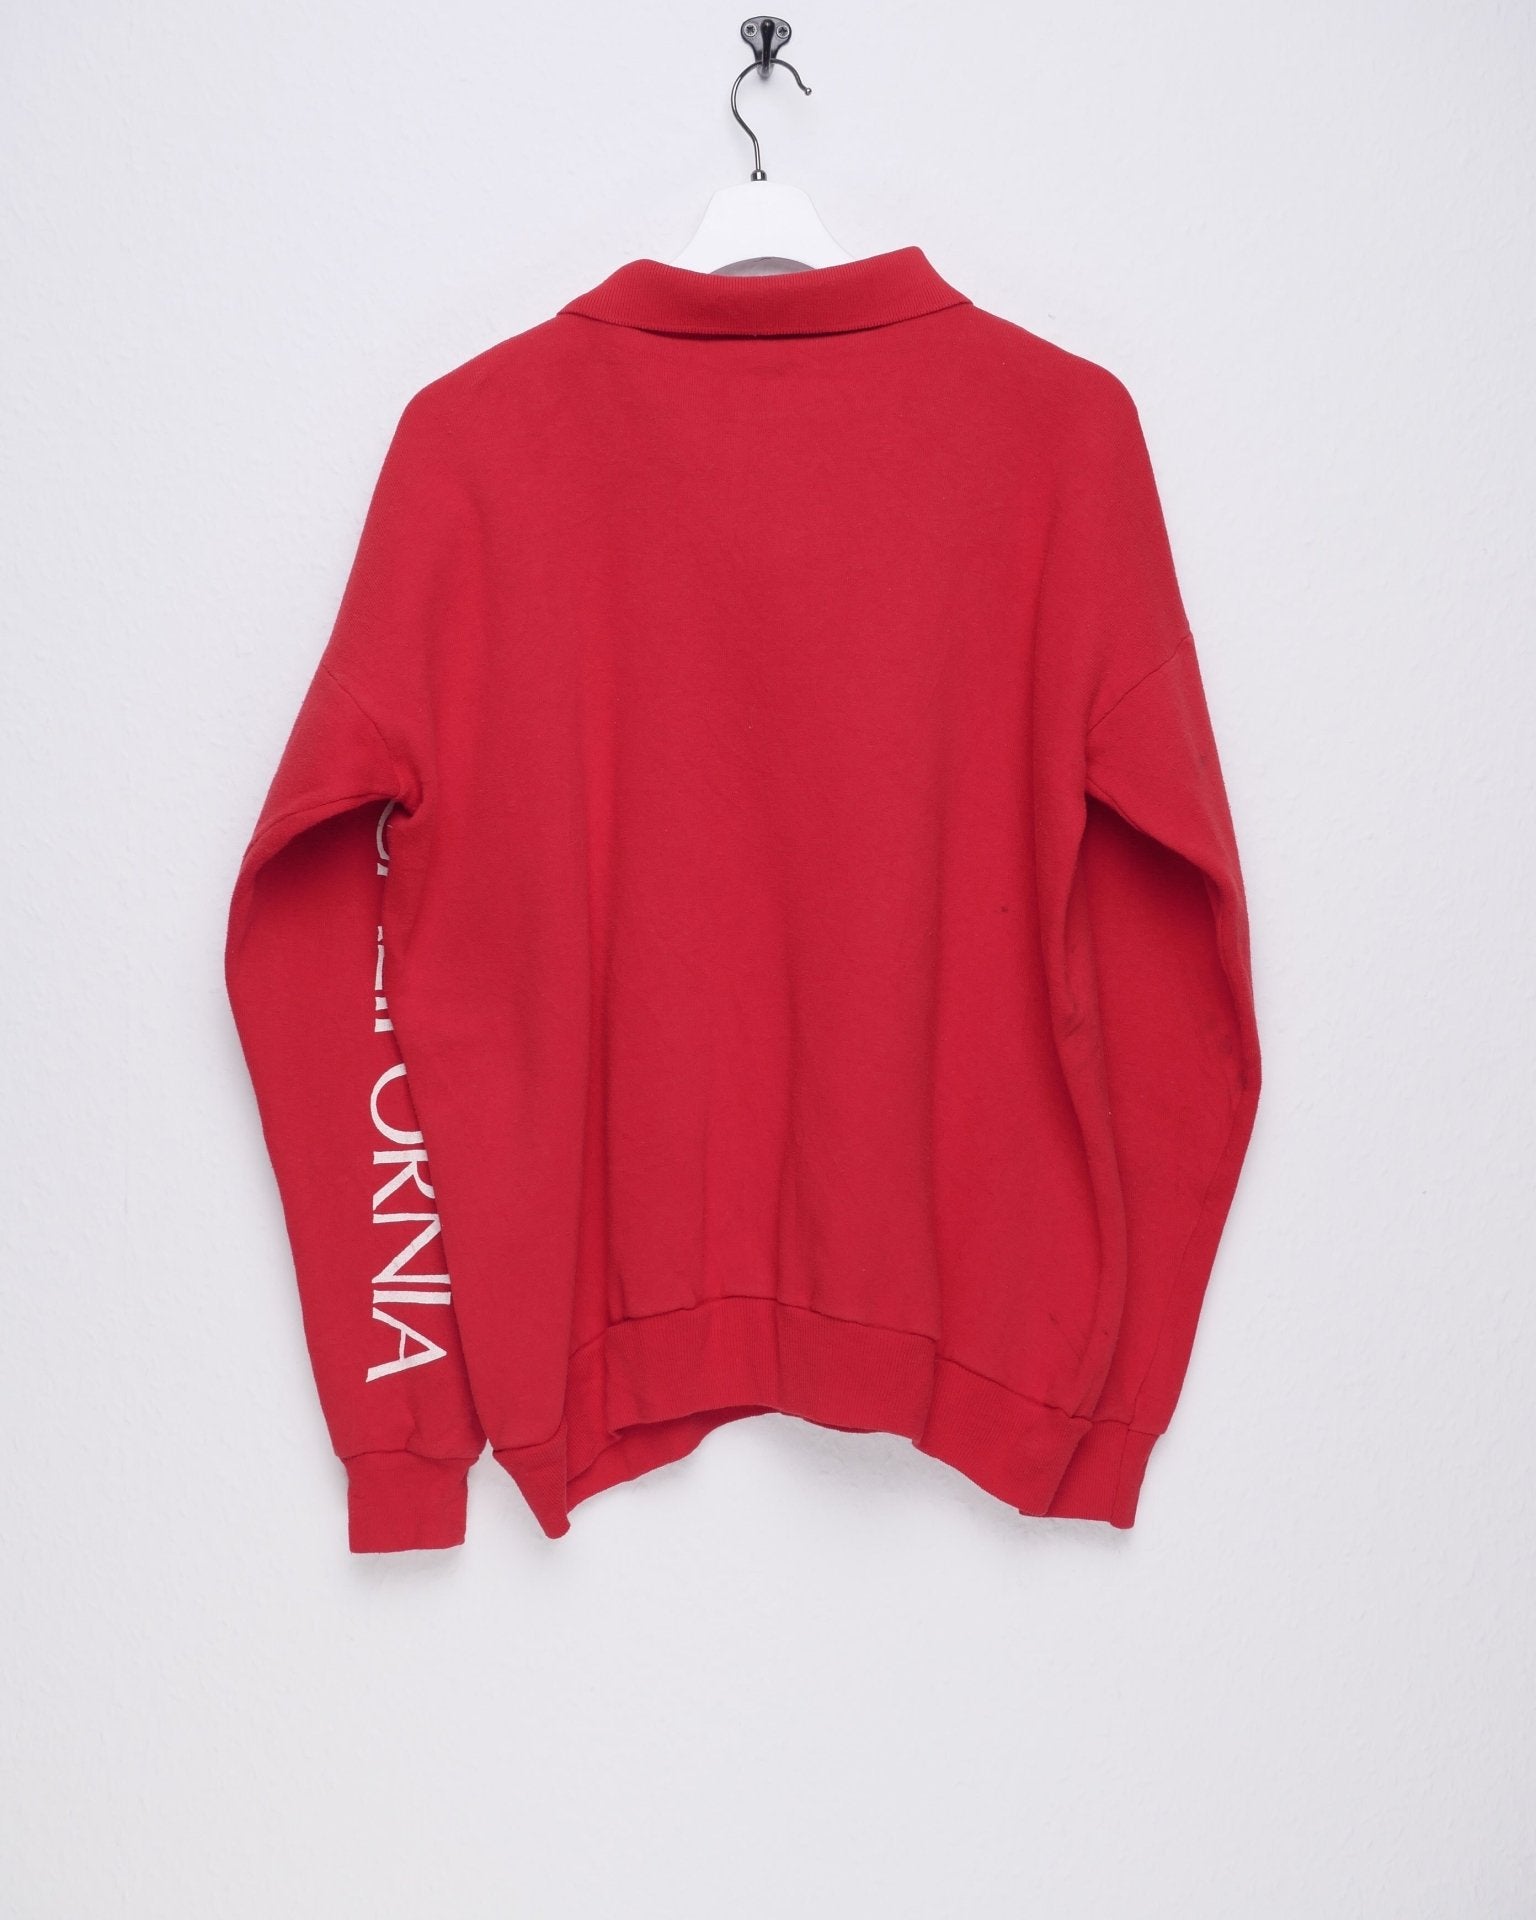 'San Francisco' printed Graphic red L/S Polo Shirt - Peeces